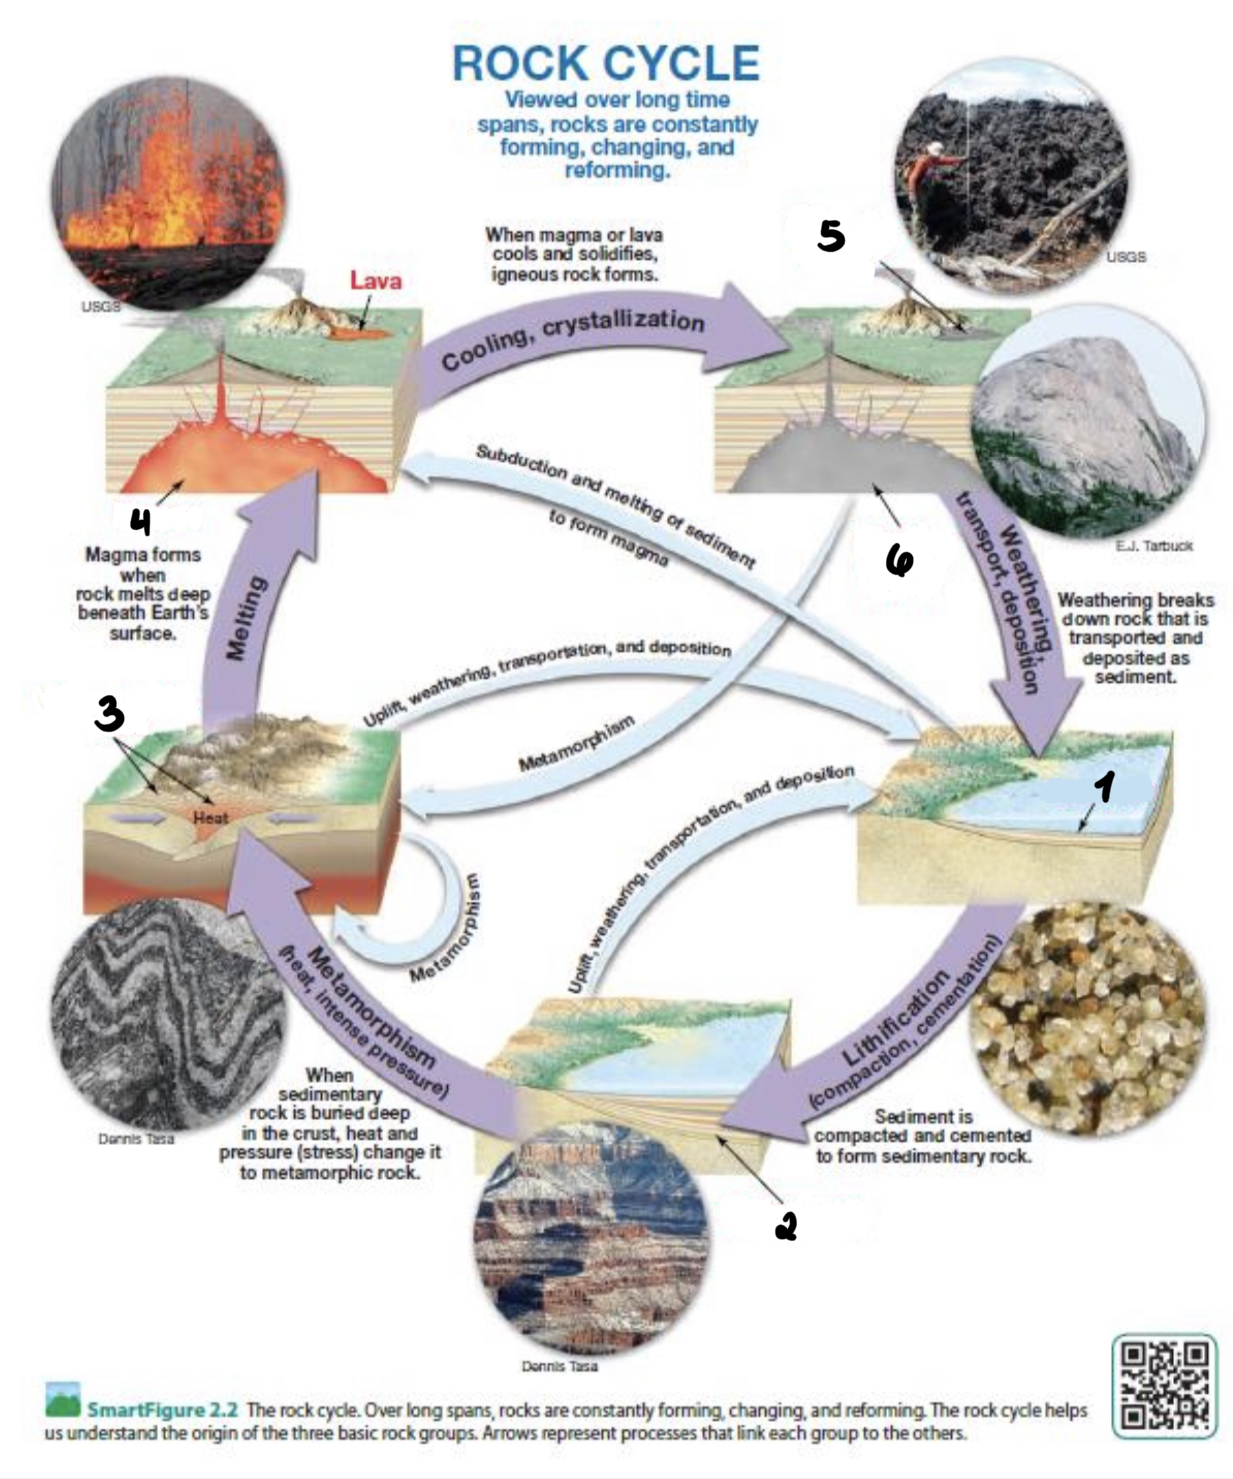 <p>(1) Rocks that has gone through weathering (2) Formed through Lithification (compaction and cementation) (3) Caused by Metamorphism (heat and intense pressure) (4) Rocks that are melted due to high heat; Able to move around (5) Magma that has cooled down very quickly (6) Magma that cooled off slowly, forming large crystals</p>